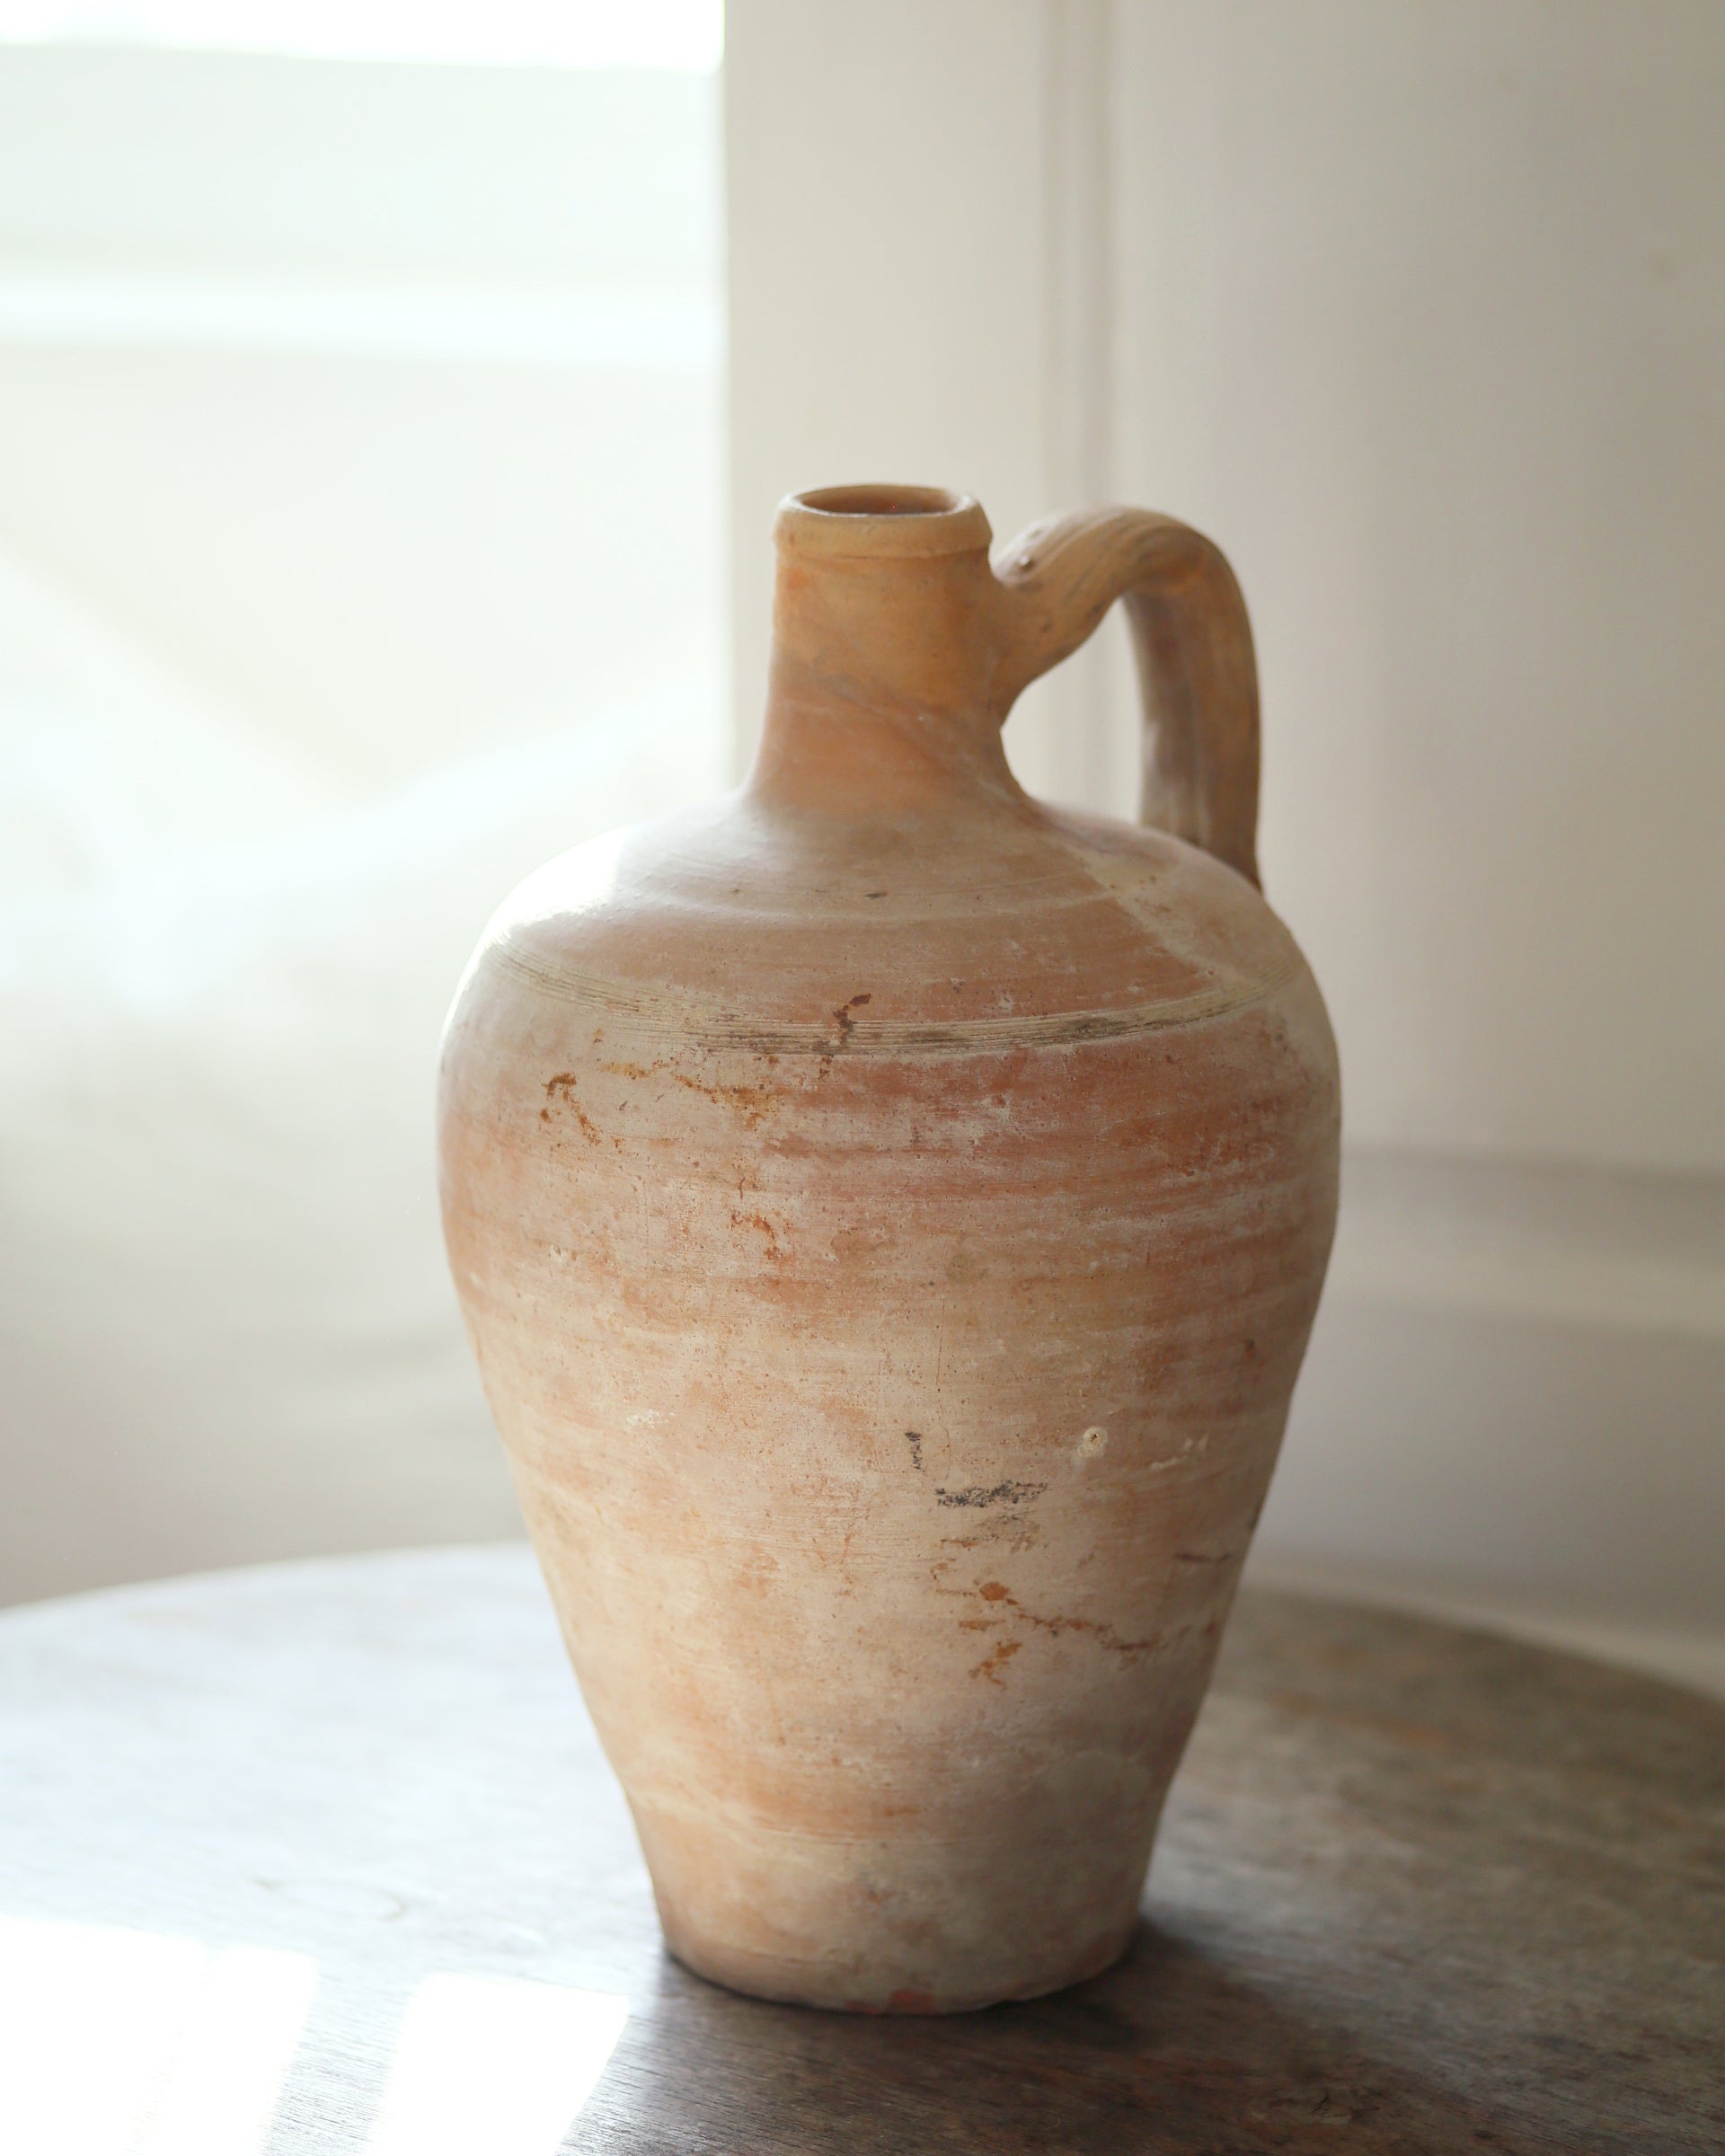 Naturally aged clay jug with bottle neck and handle